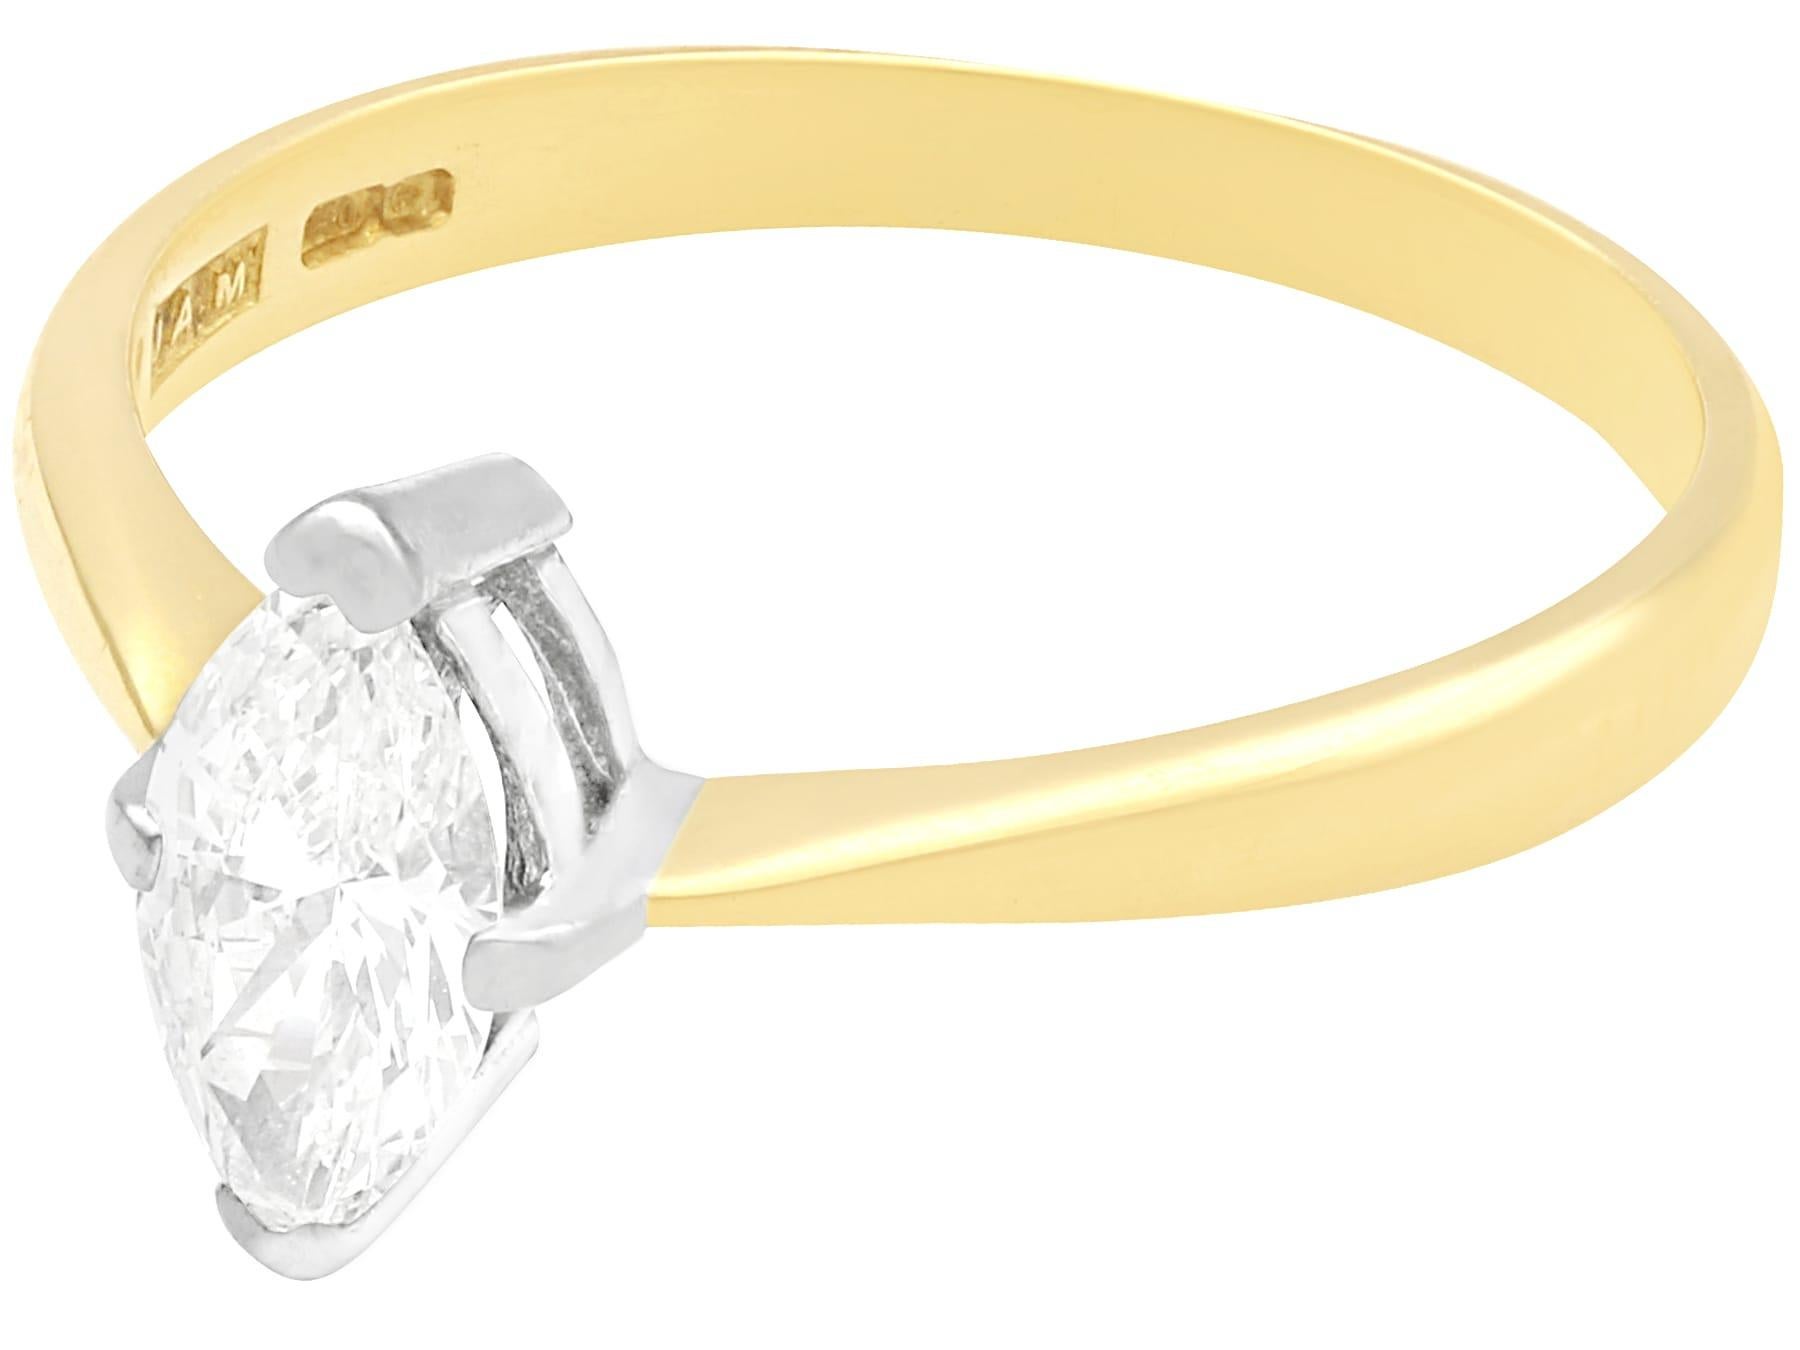 A fine and impressive vintage 0.56 carat diamond and 18 karat yellow gold, 18 karat white gold set solitaire ring; part of our diamond jewelry and estate jewelry collections.

This impressive marquise solitaire ring has been crafted in 18k yellow